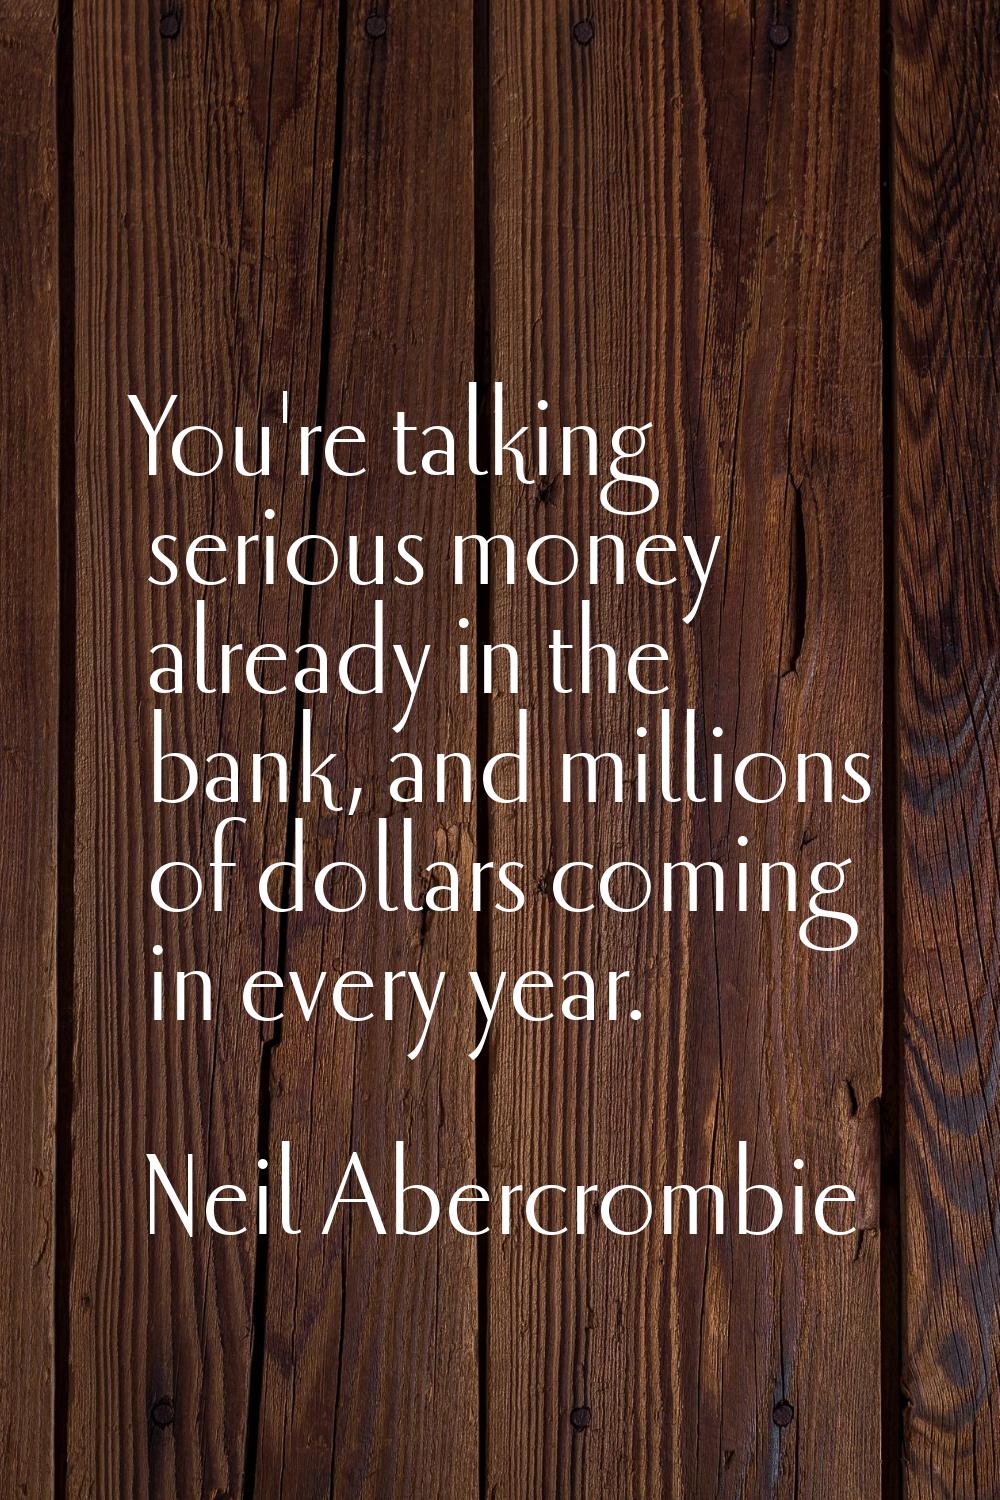 You're talking serious money already in the bank, and millions of dollars coming in every year.